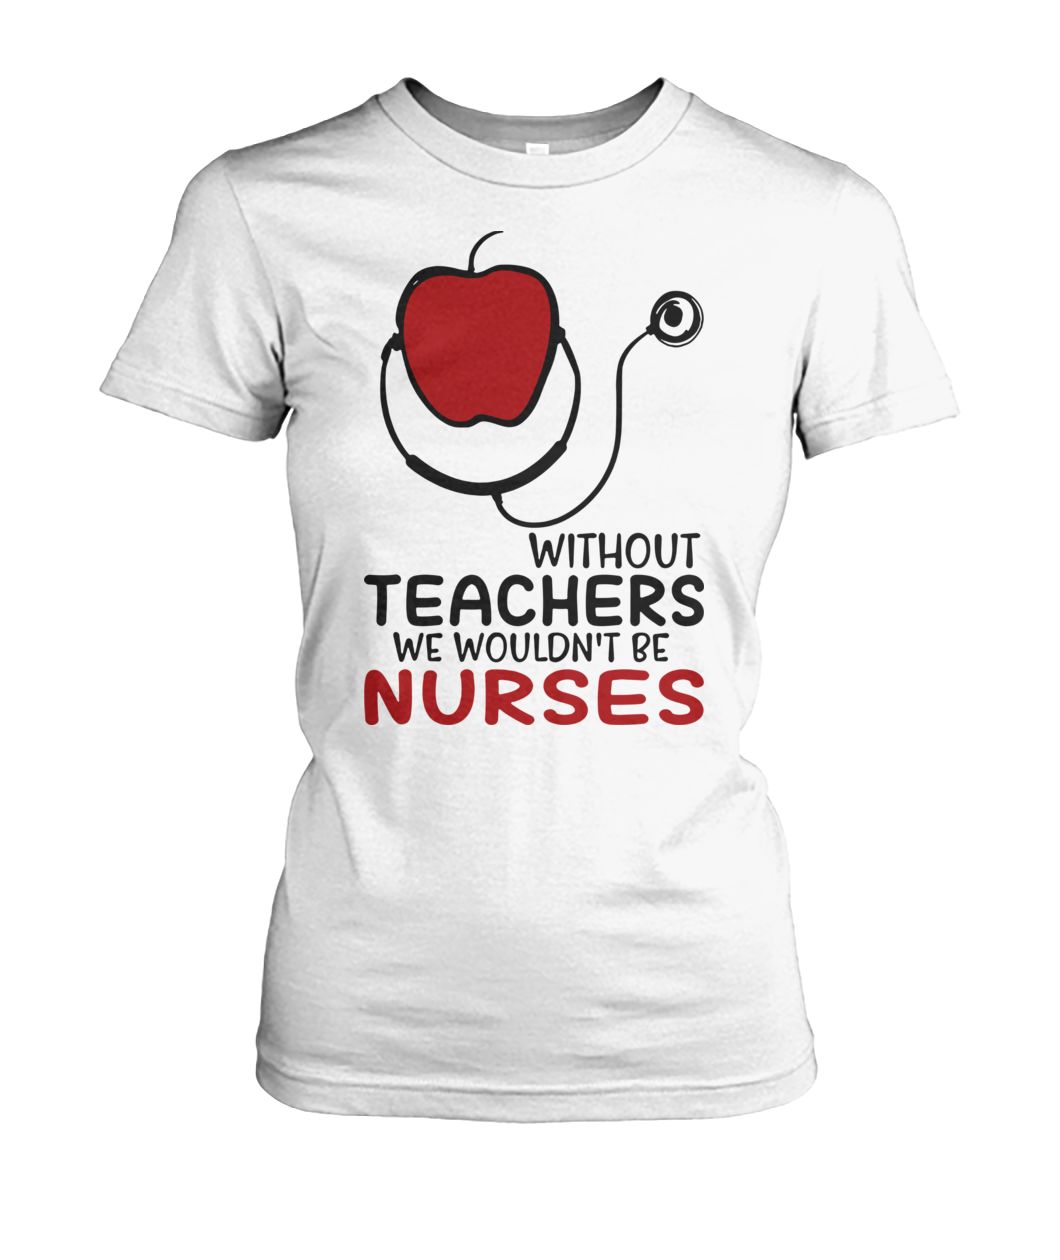 Without teachers we wouldn't be nurses women's crew tee